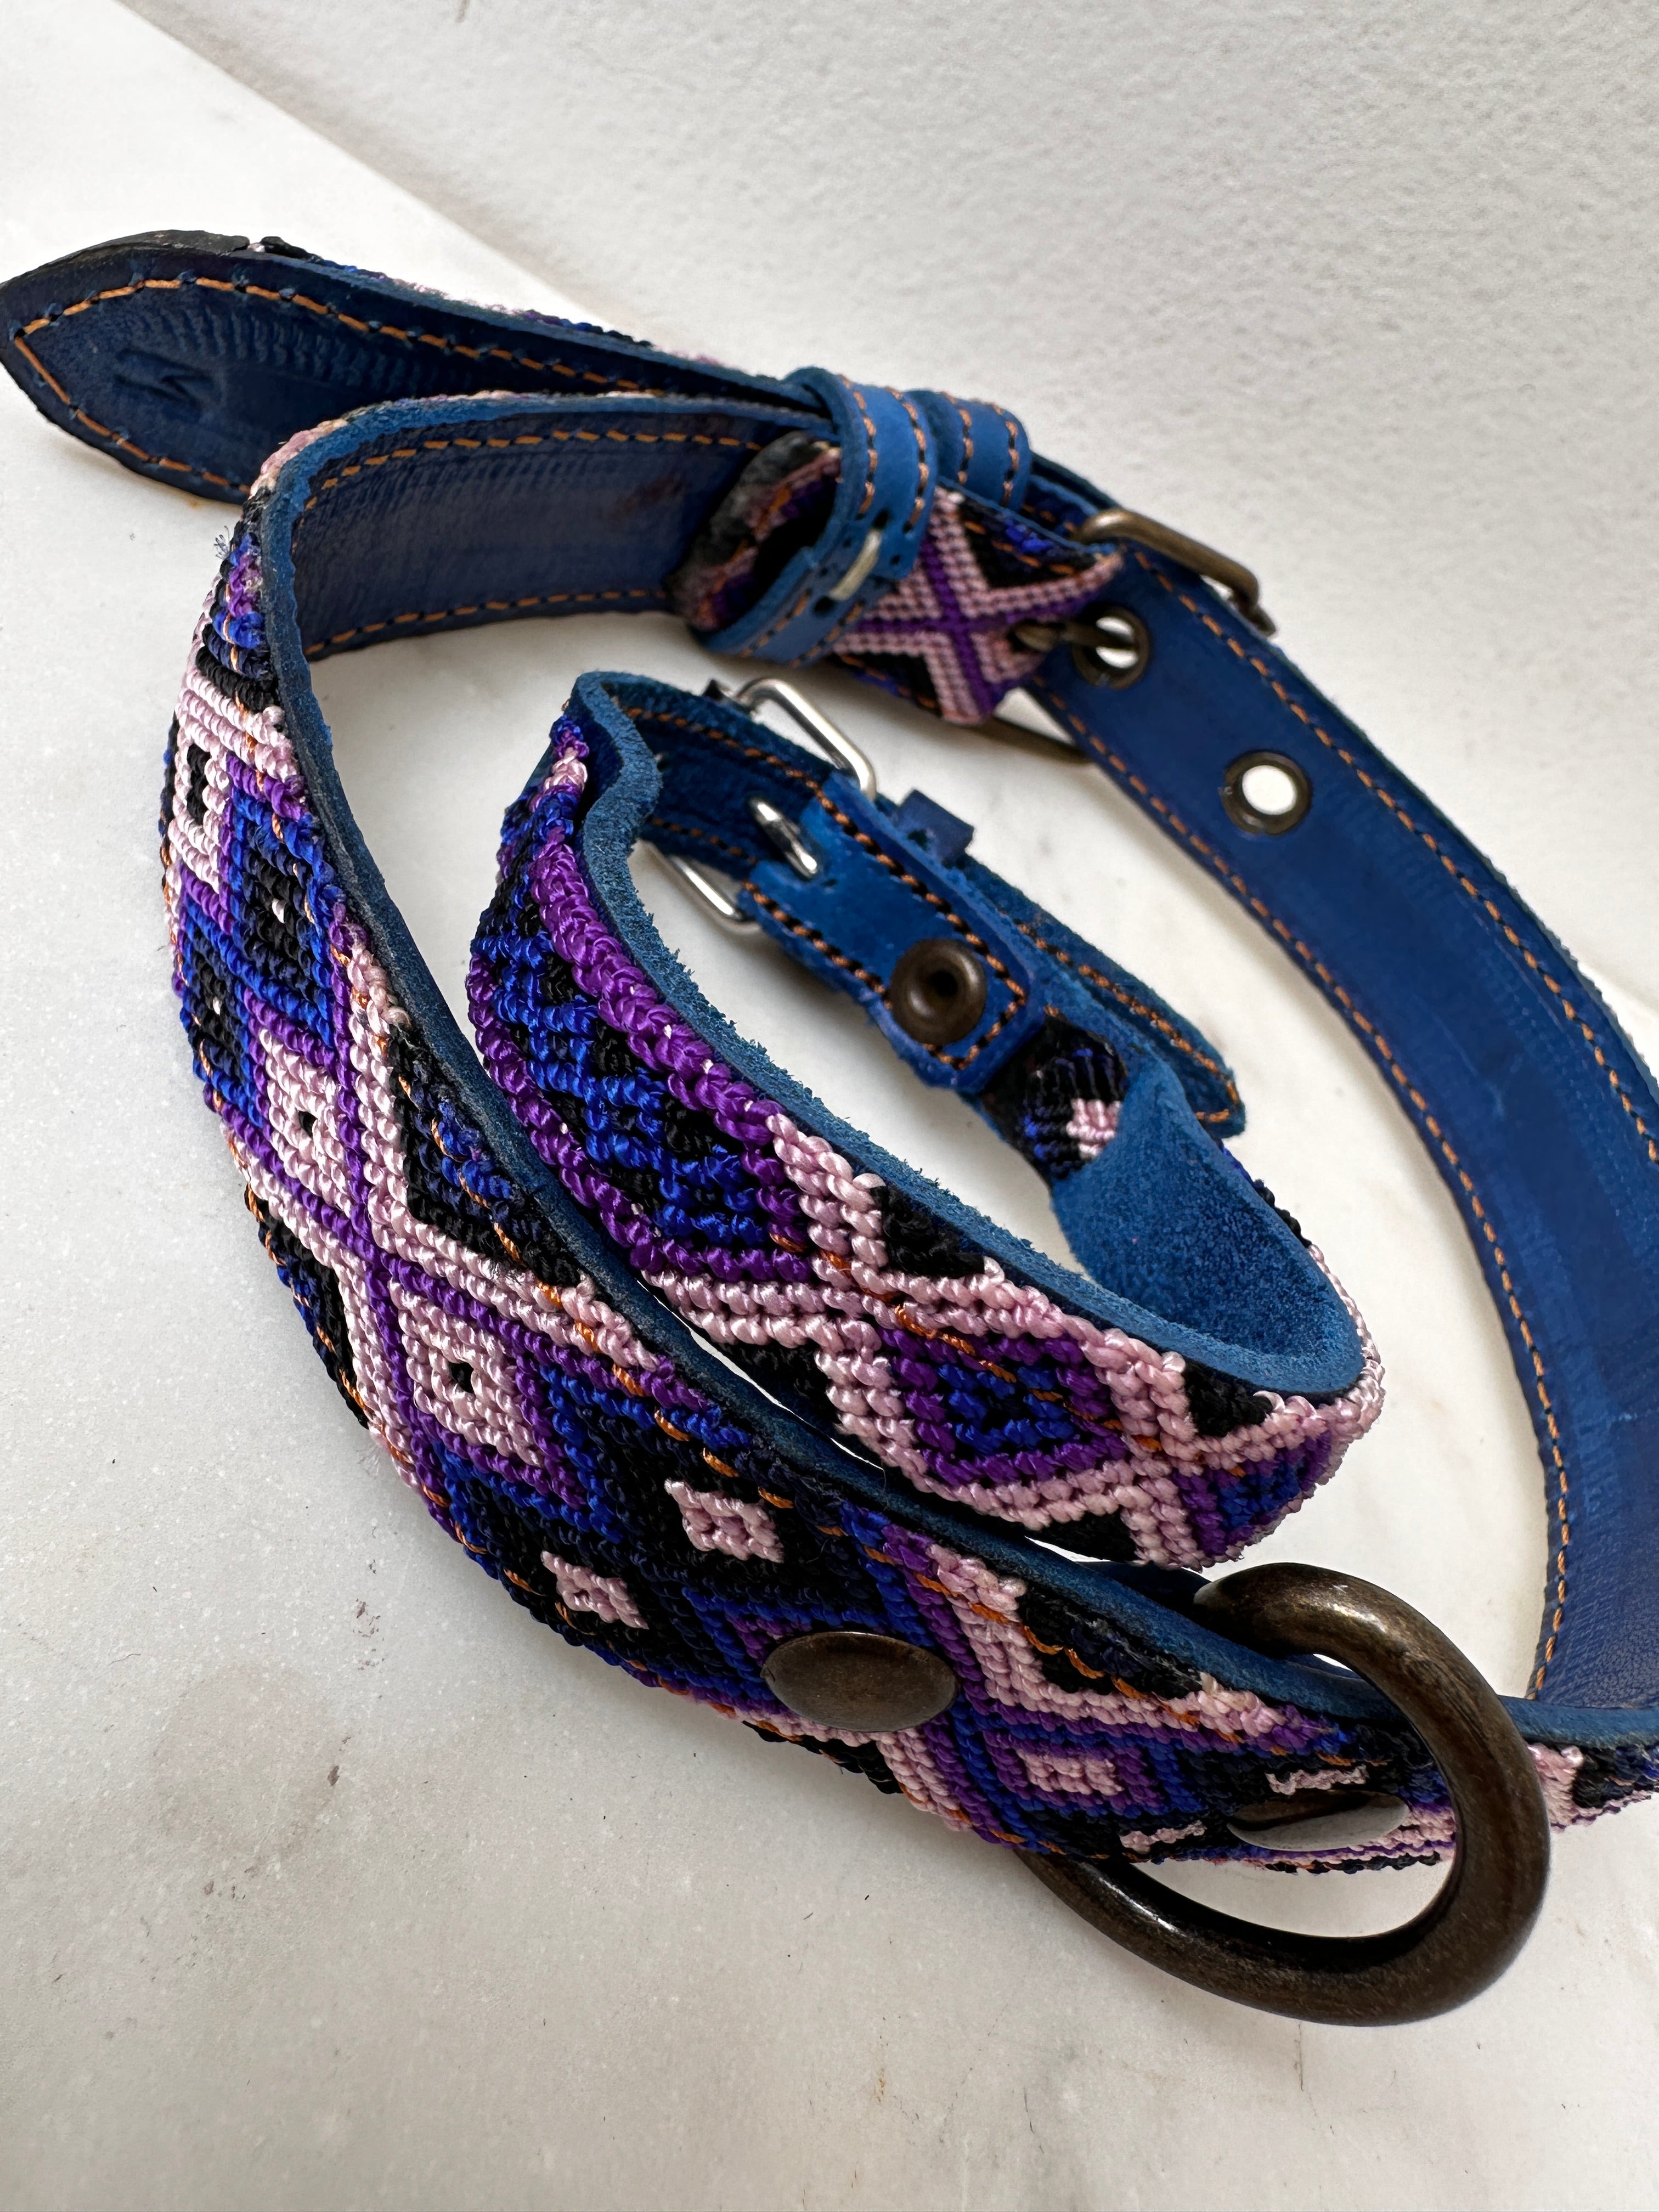 Future Nomads Homewares One Size Huichol Fully Embroidered Dog Collar M5